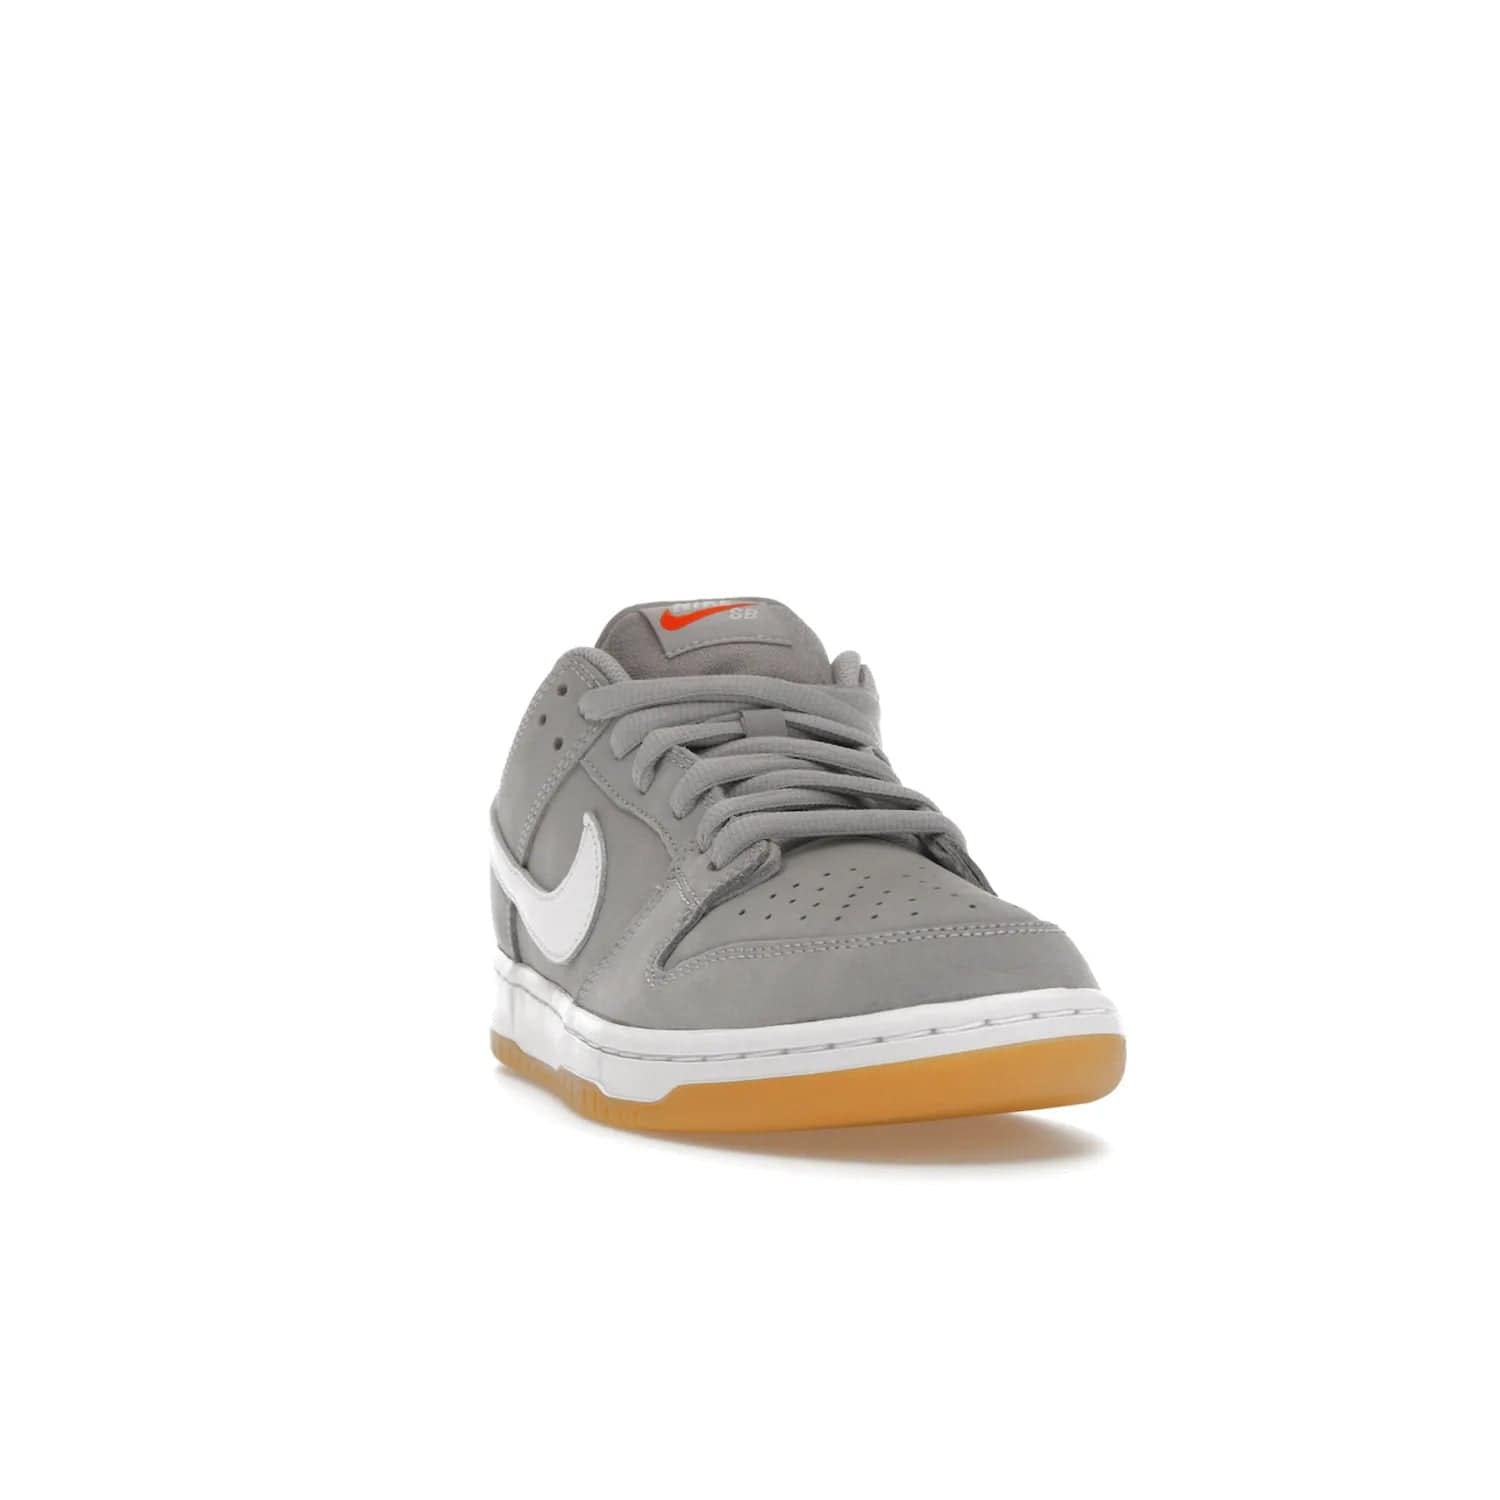 Nike SB Dunk Low Pro ISO Orange Label Wolf Grey Gum - Image 8 - Only at www.BallersClubKickz.com - Introducing Nike's SB Dunk Low Pro ISO Orange Label Wolf Grey Gum - a stylish shoe with a premium Wolf Grey upper, white leather Nike Swoosh, and an eye-catching gum outsole. With special Nike branding and packaging, this shoe adds a unique fashion statement. Out Feb. 24, 2023.